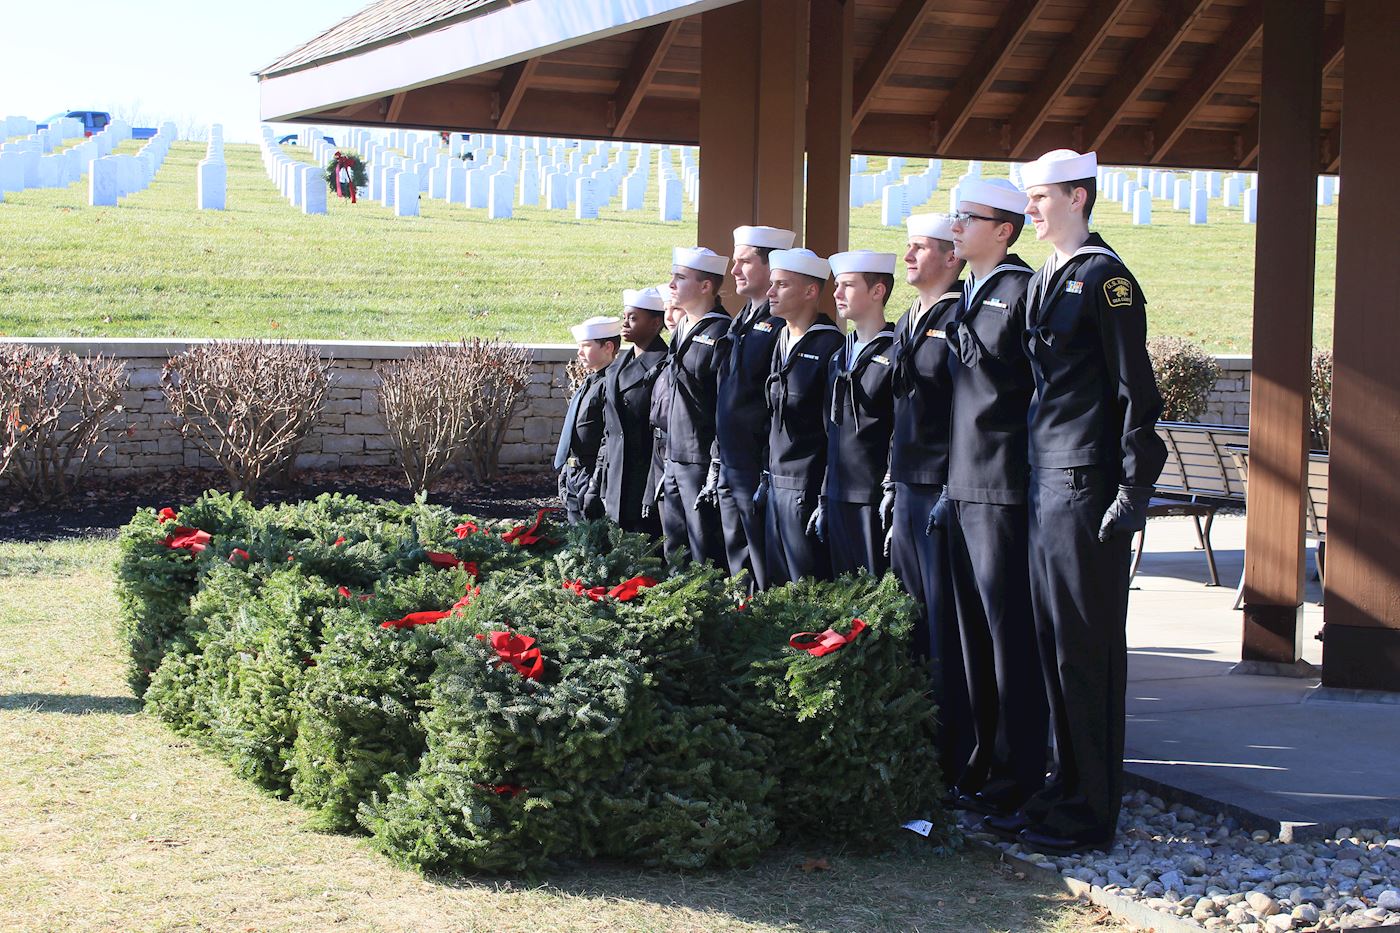 We were proud to have the U.S. Naval Sea Cadet Corps participate in our ceremony.